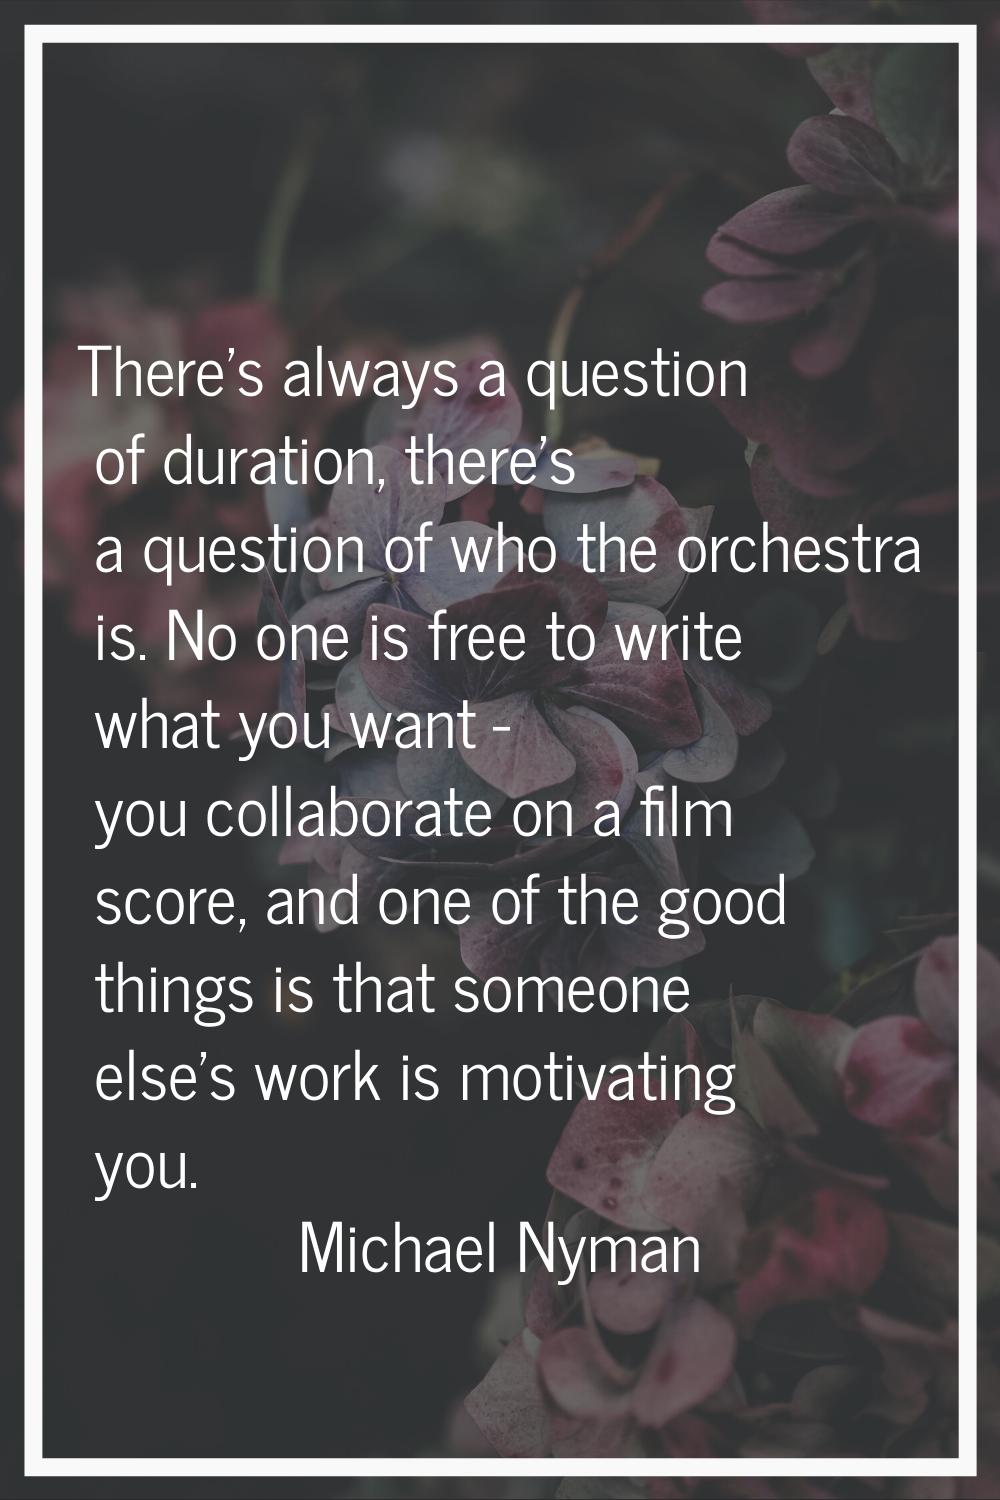 There's always a question of duration, there's a question of who the orchestra is. No one is free t